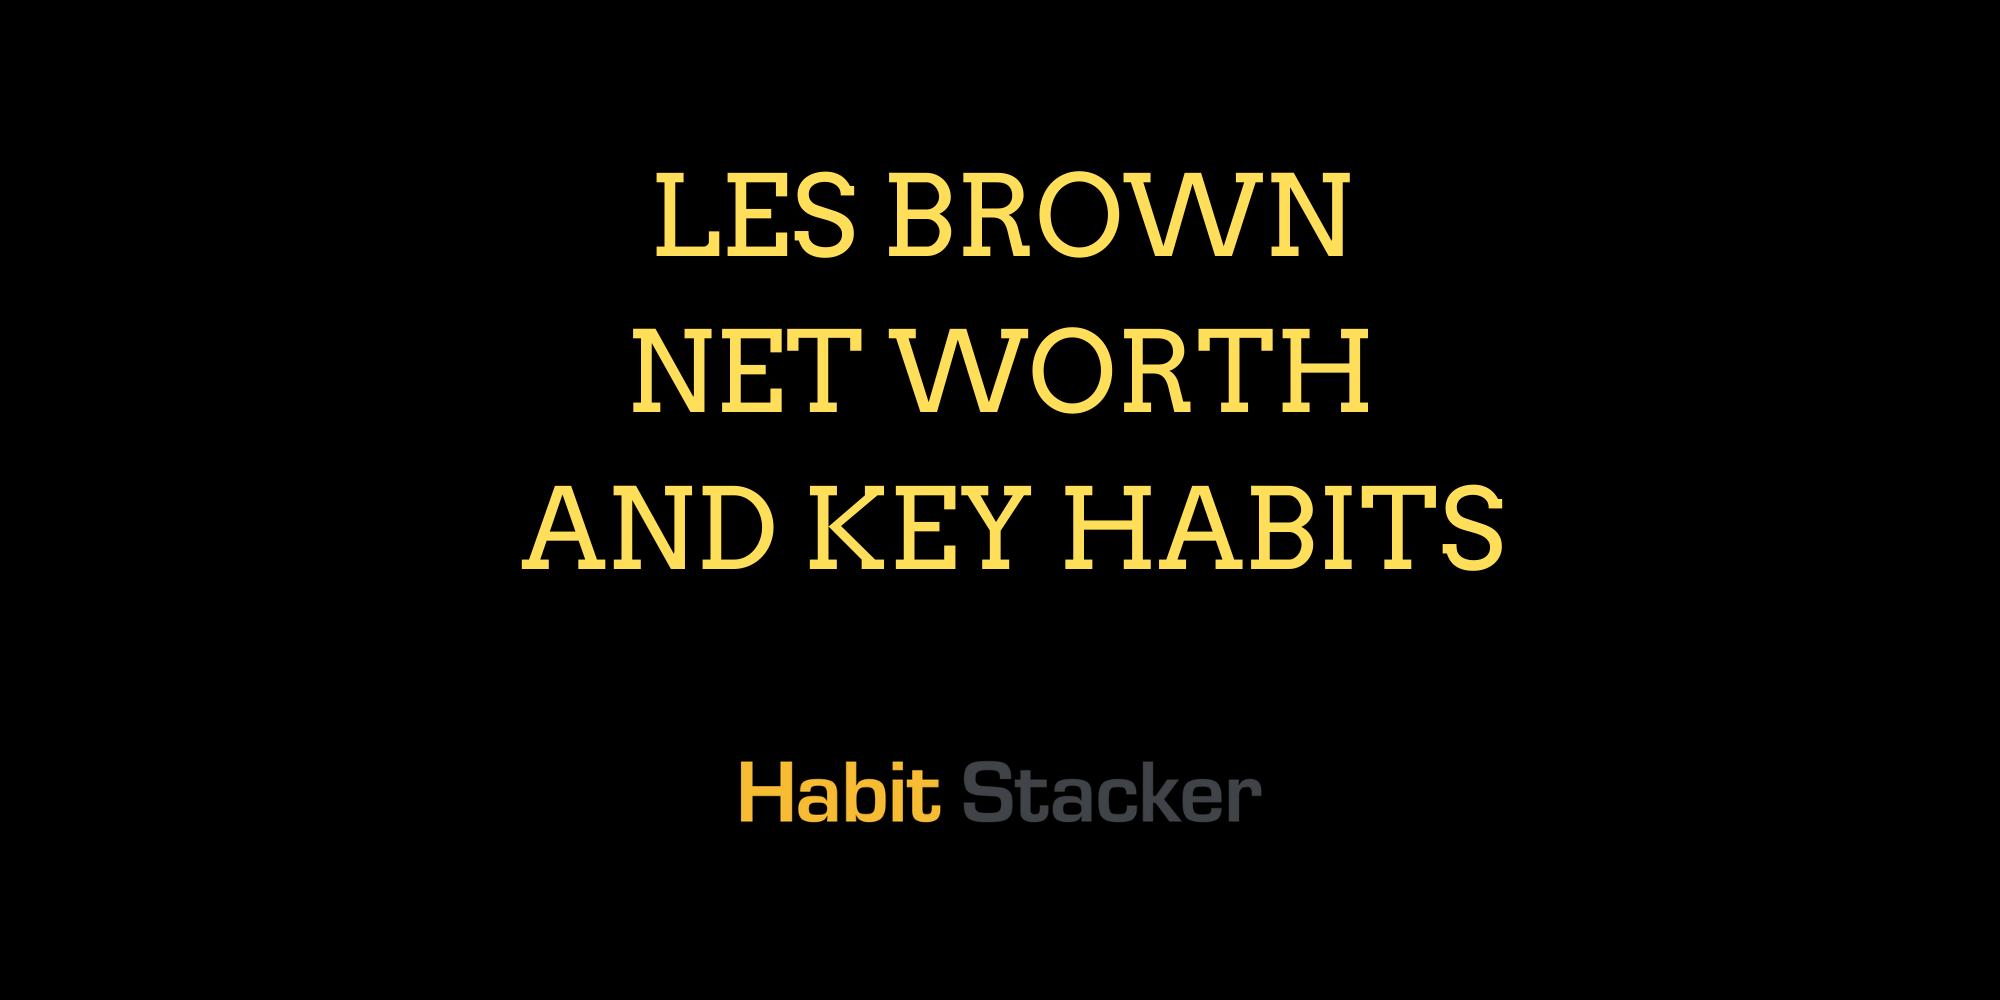 Les Brown Net Worth and Key Habits